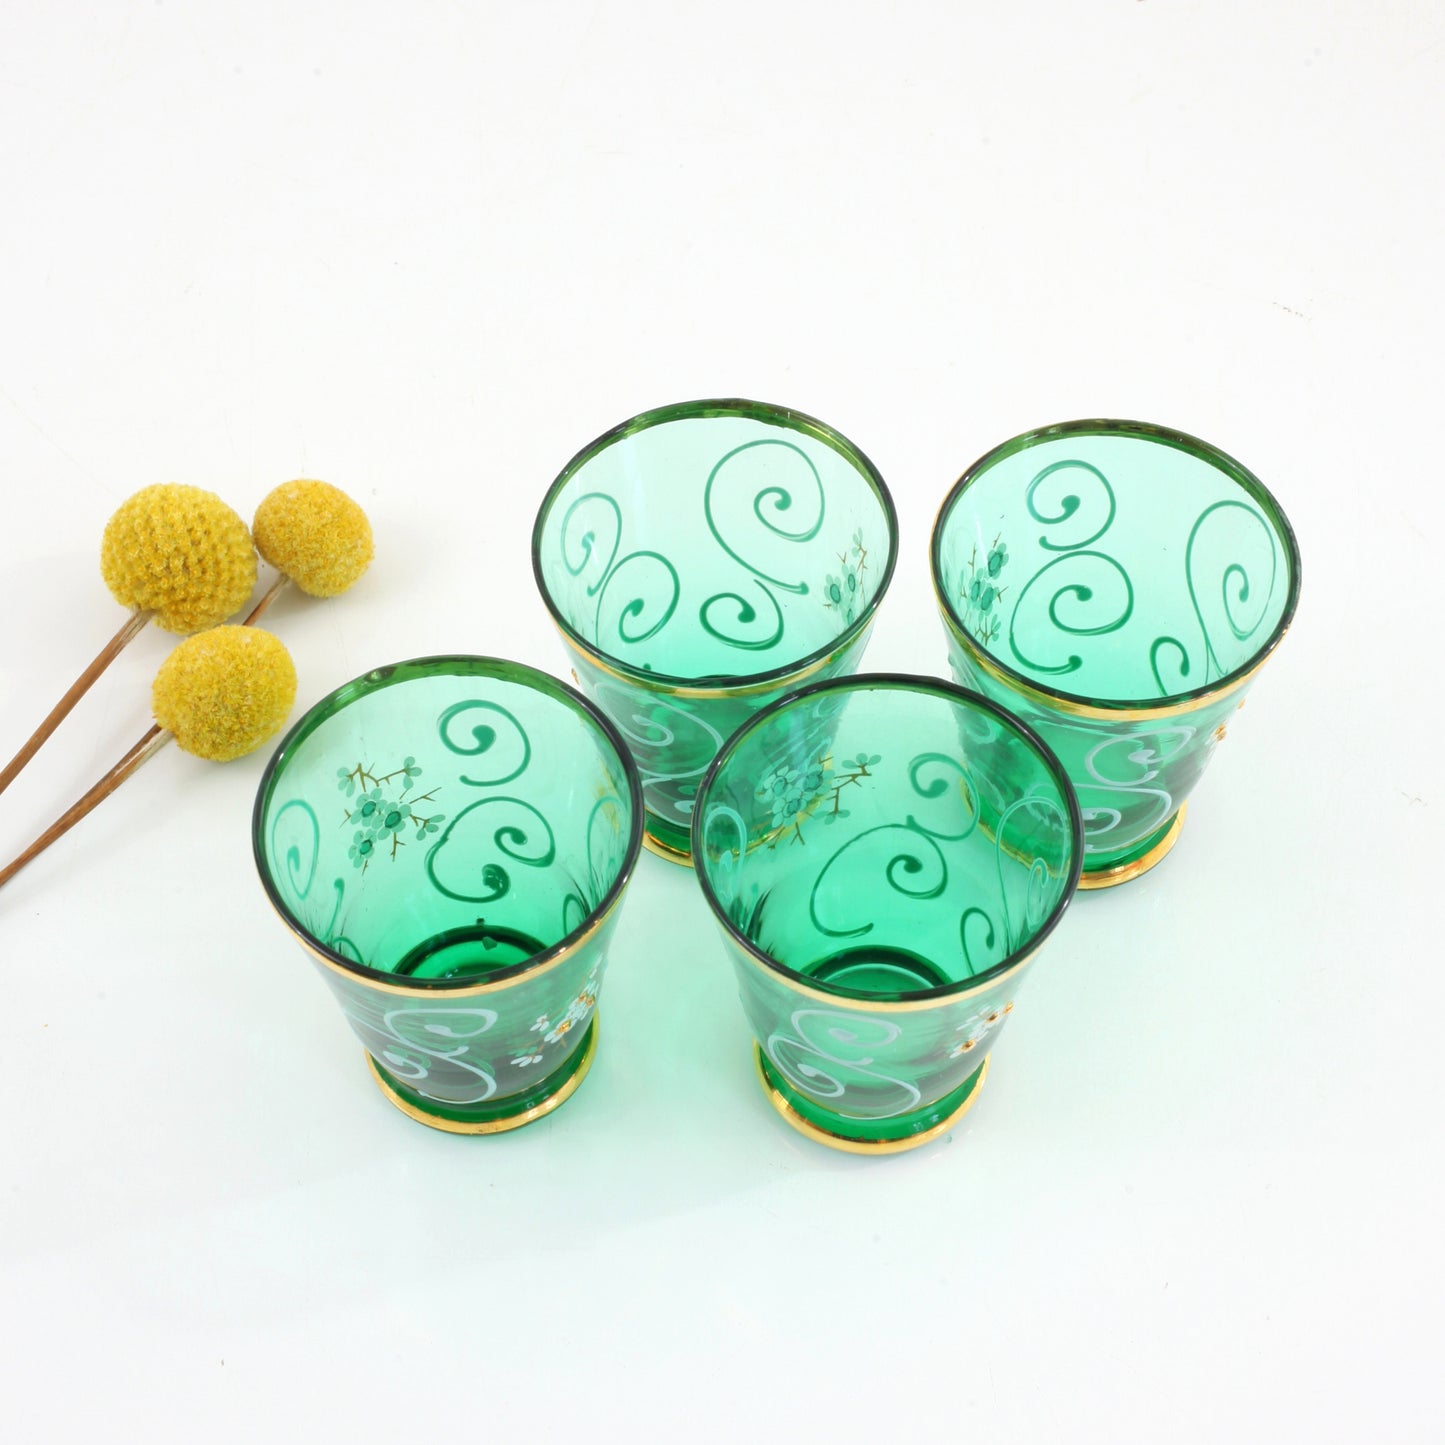 SOLD - Vintage Hand Painted Emerald Green Bohemian Shot Glasses